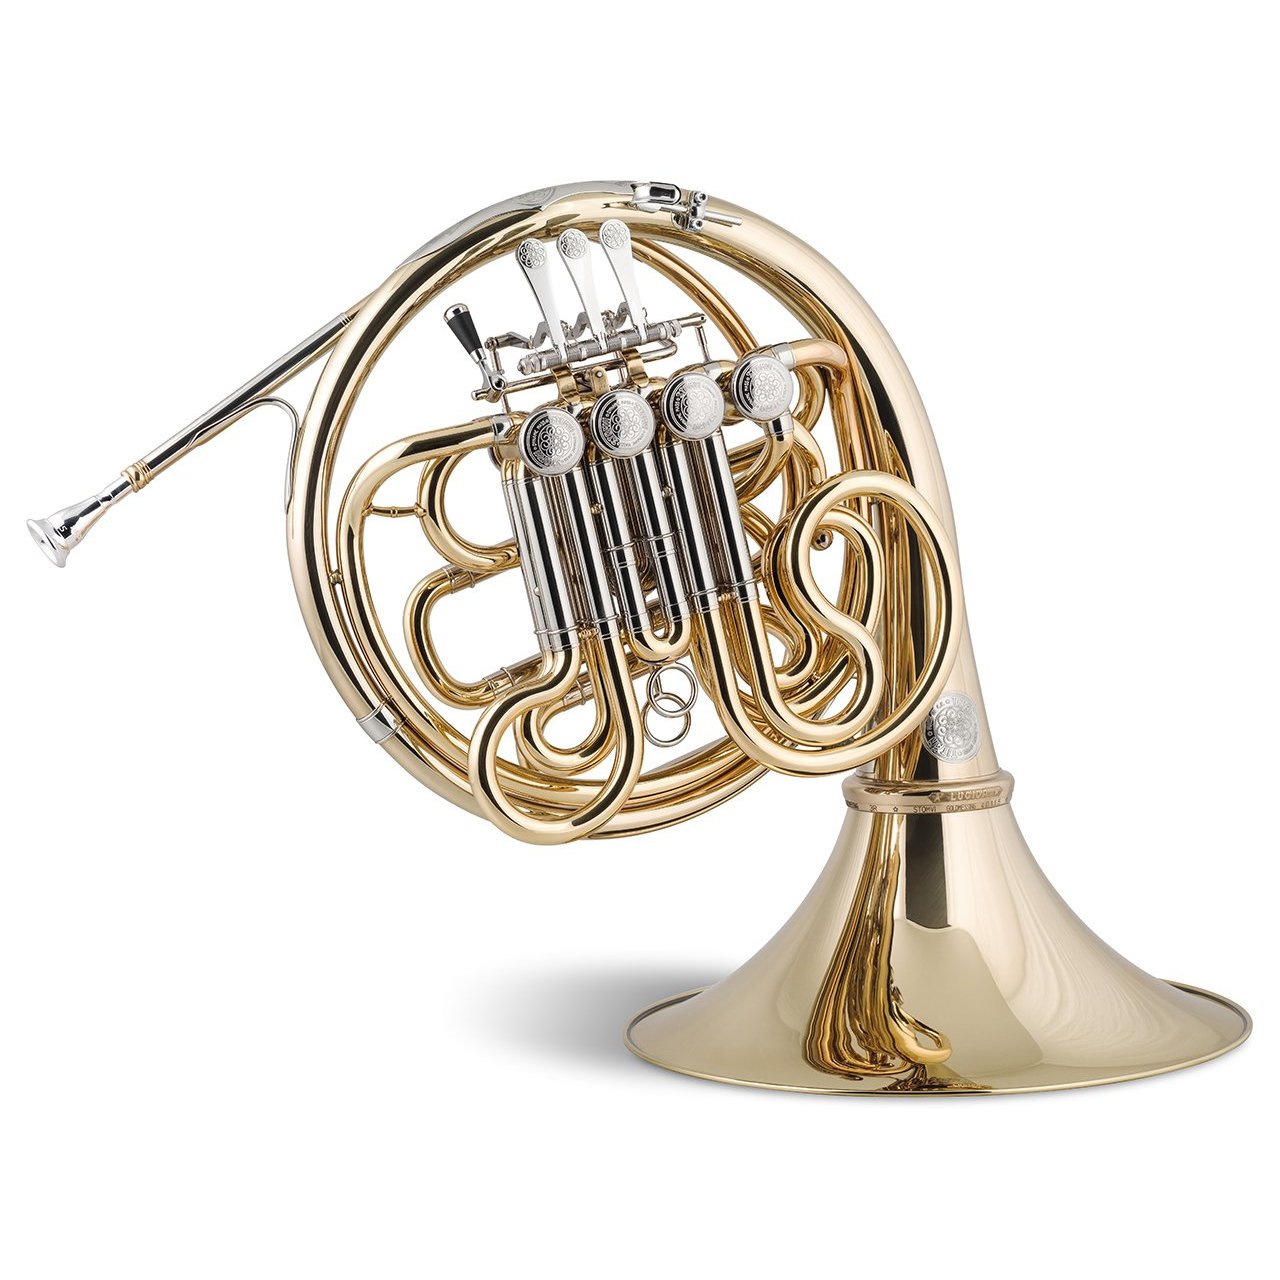 Stomvi - TitÃ¡n SEIS Bb/F Double Bellflex French Horns (Geyer System)-French Horn-Stomvi-Music Elements